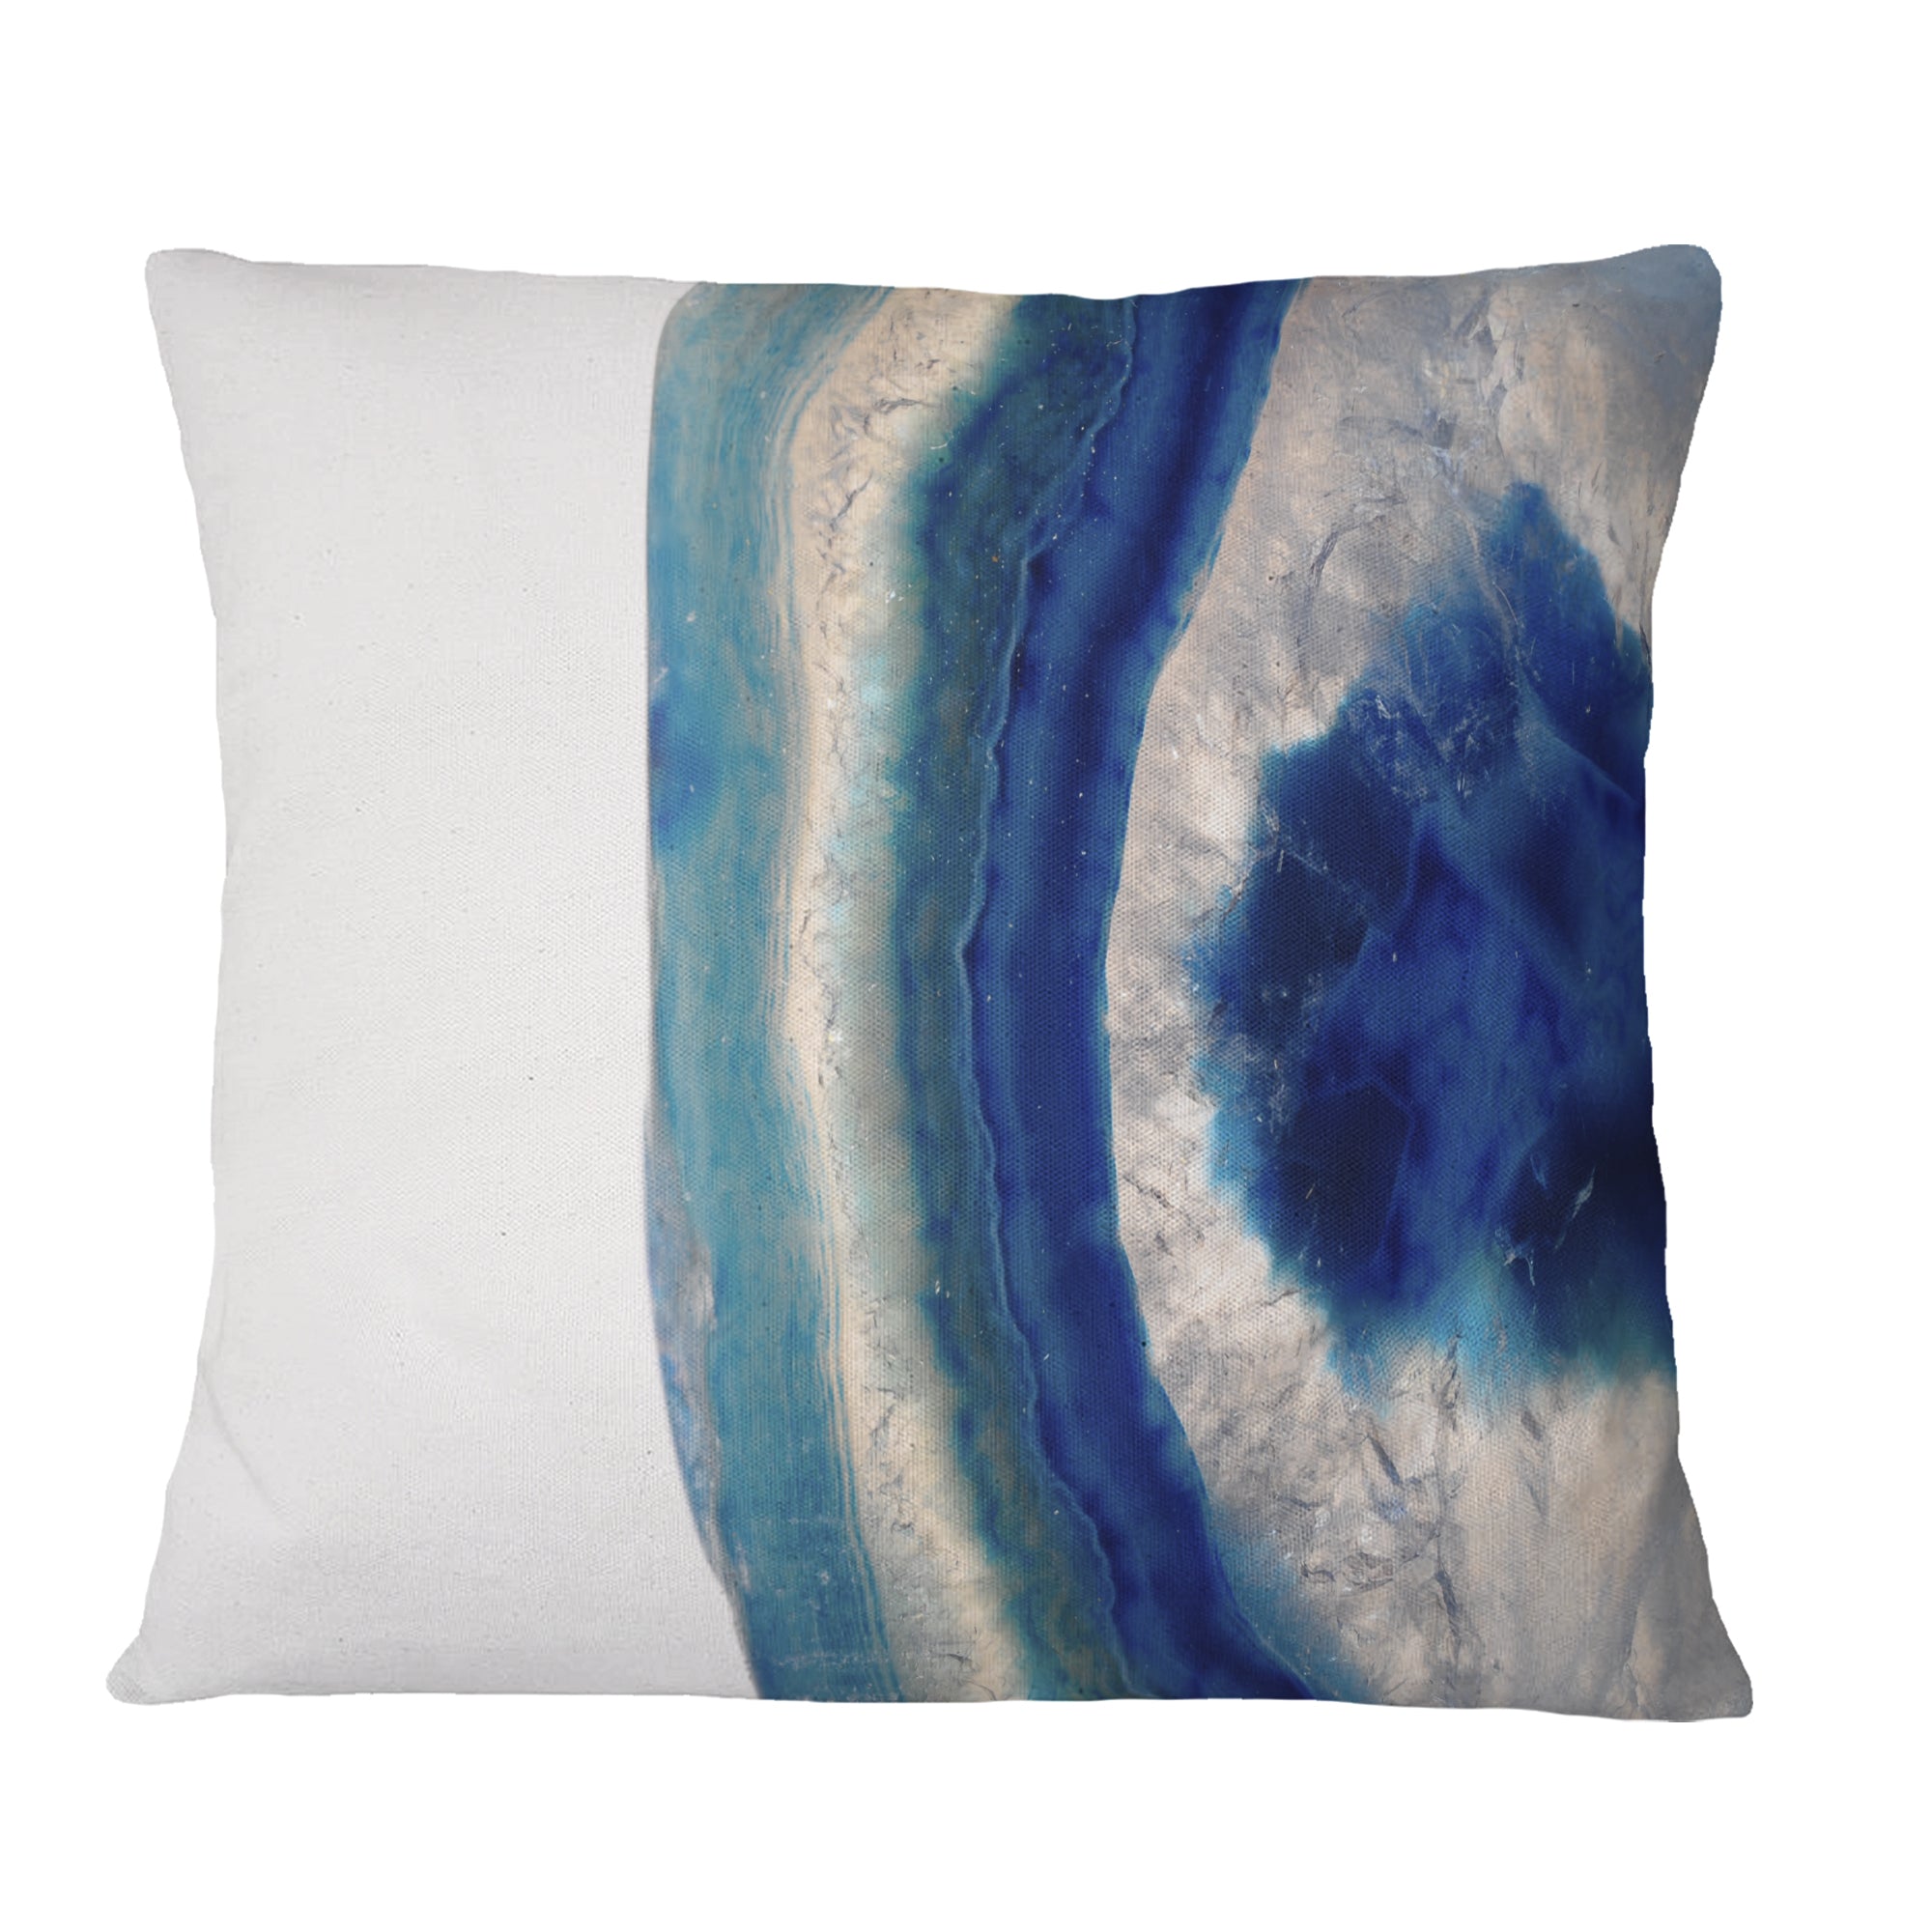 Macro of Blue Agate Stone - Abstract Throw Pillow